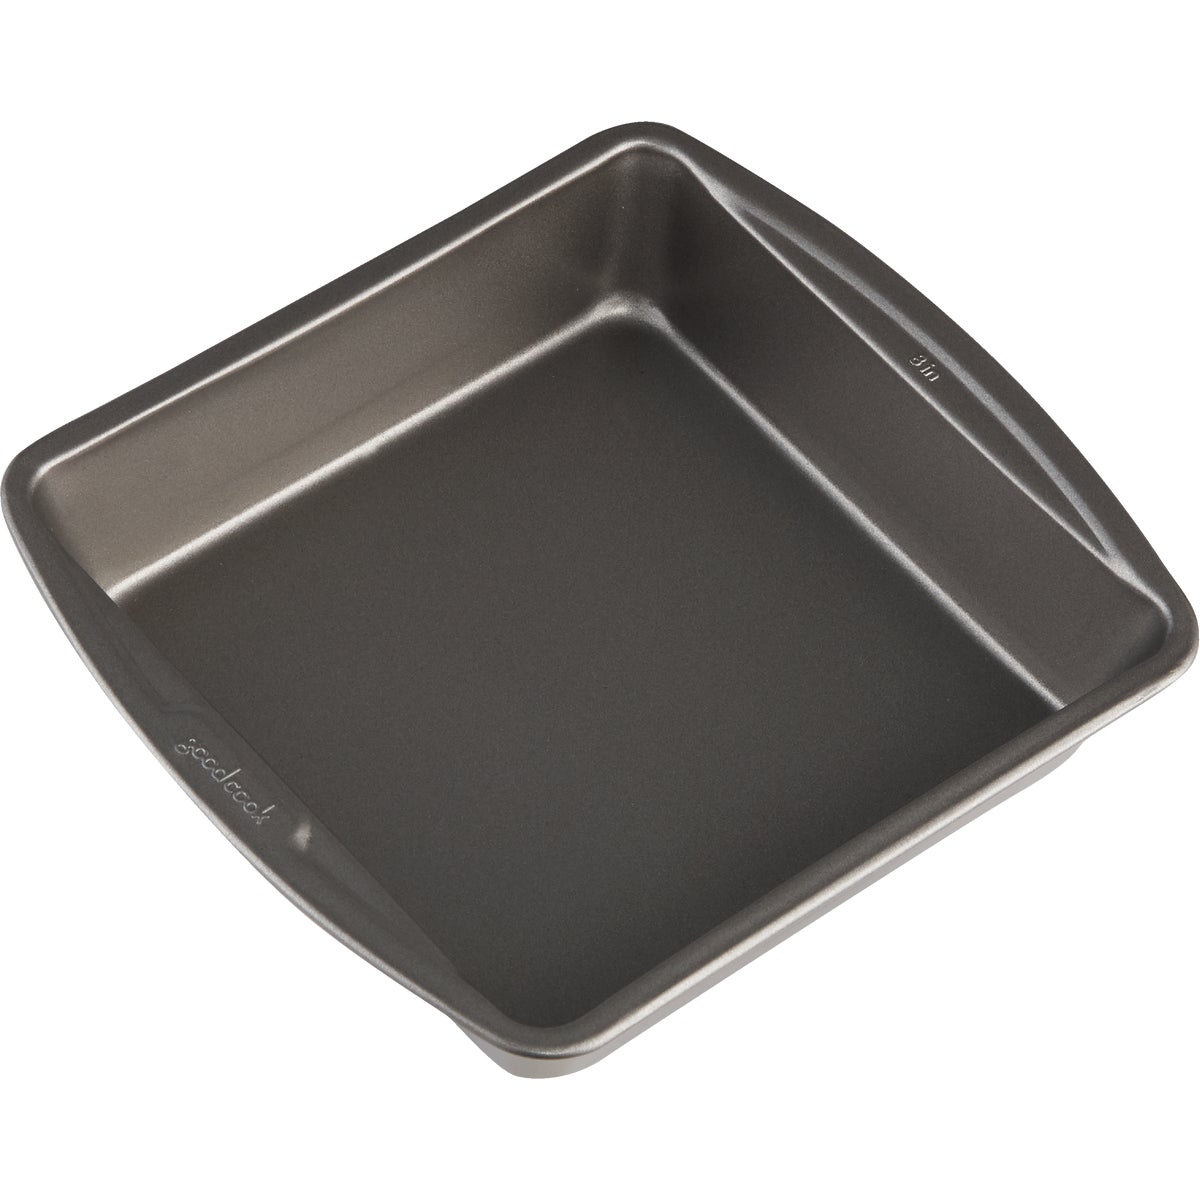 Item 603217, GoodCook cake pan is designed to distribute heat evenly and quickly to 